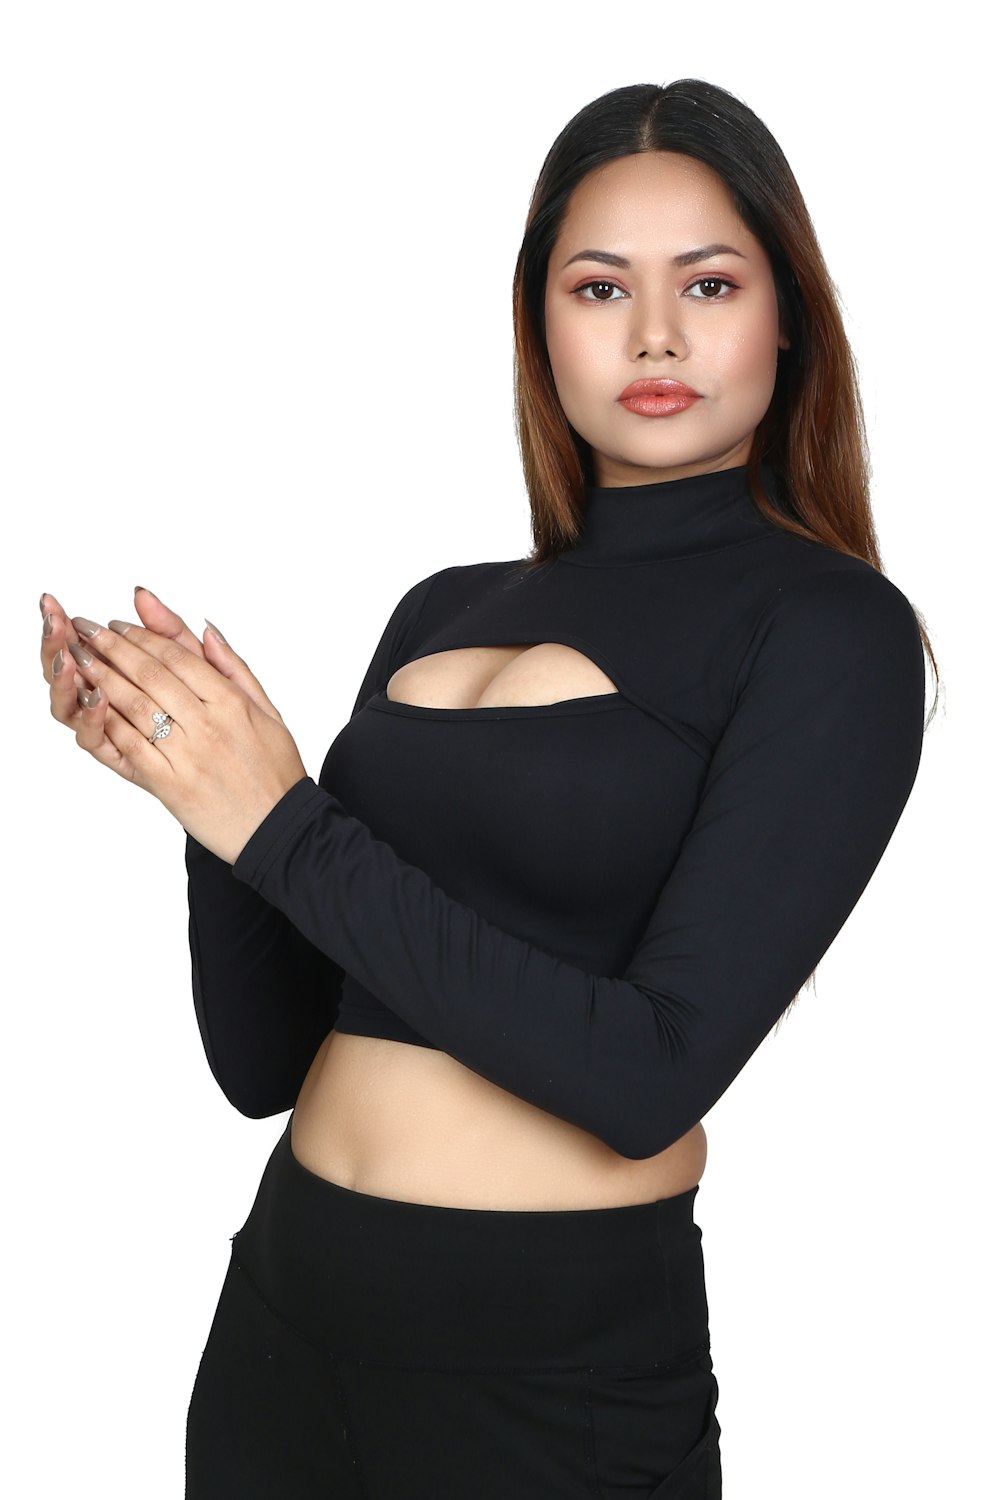 a woman wearing a black top and black pants